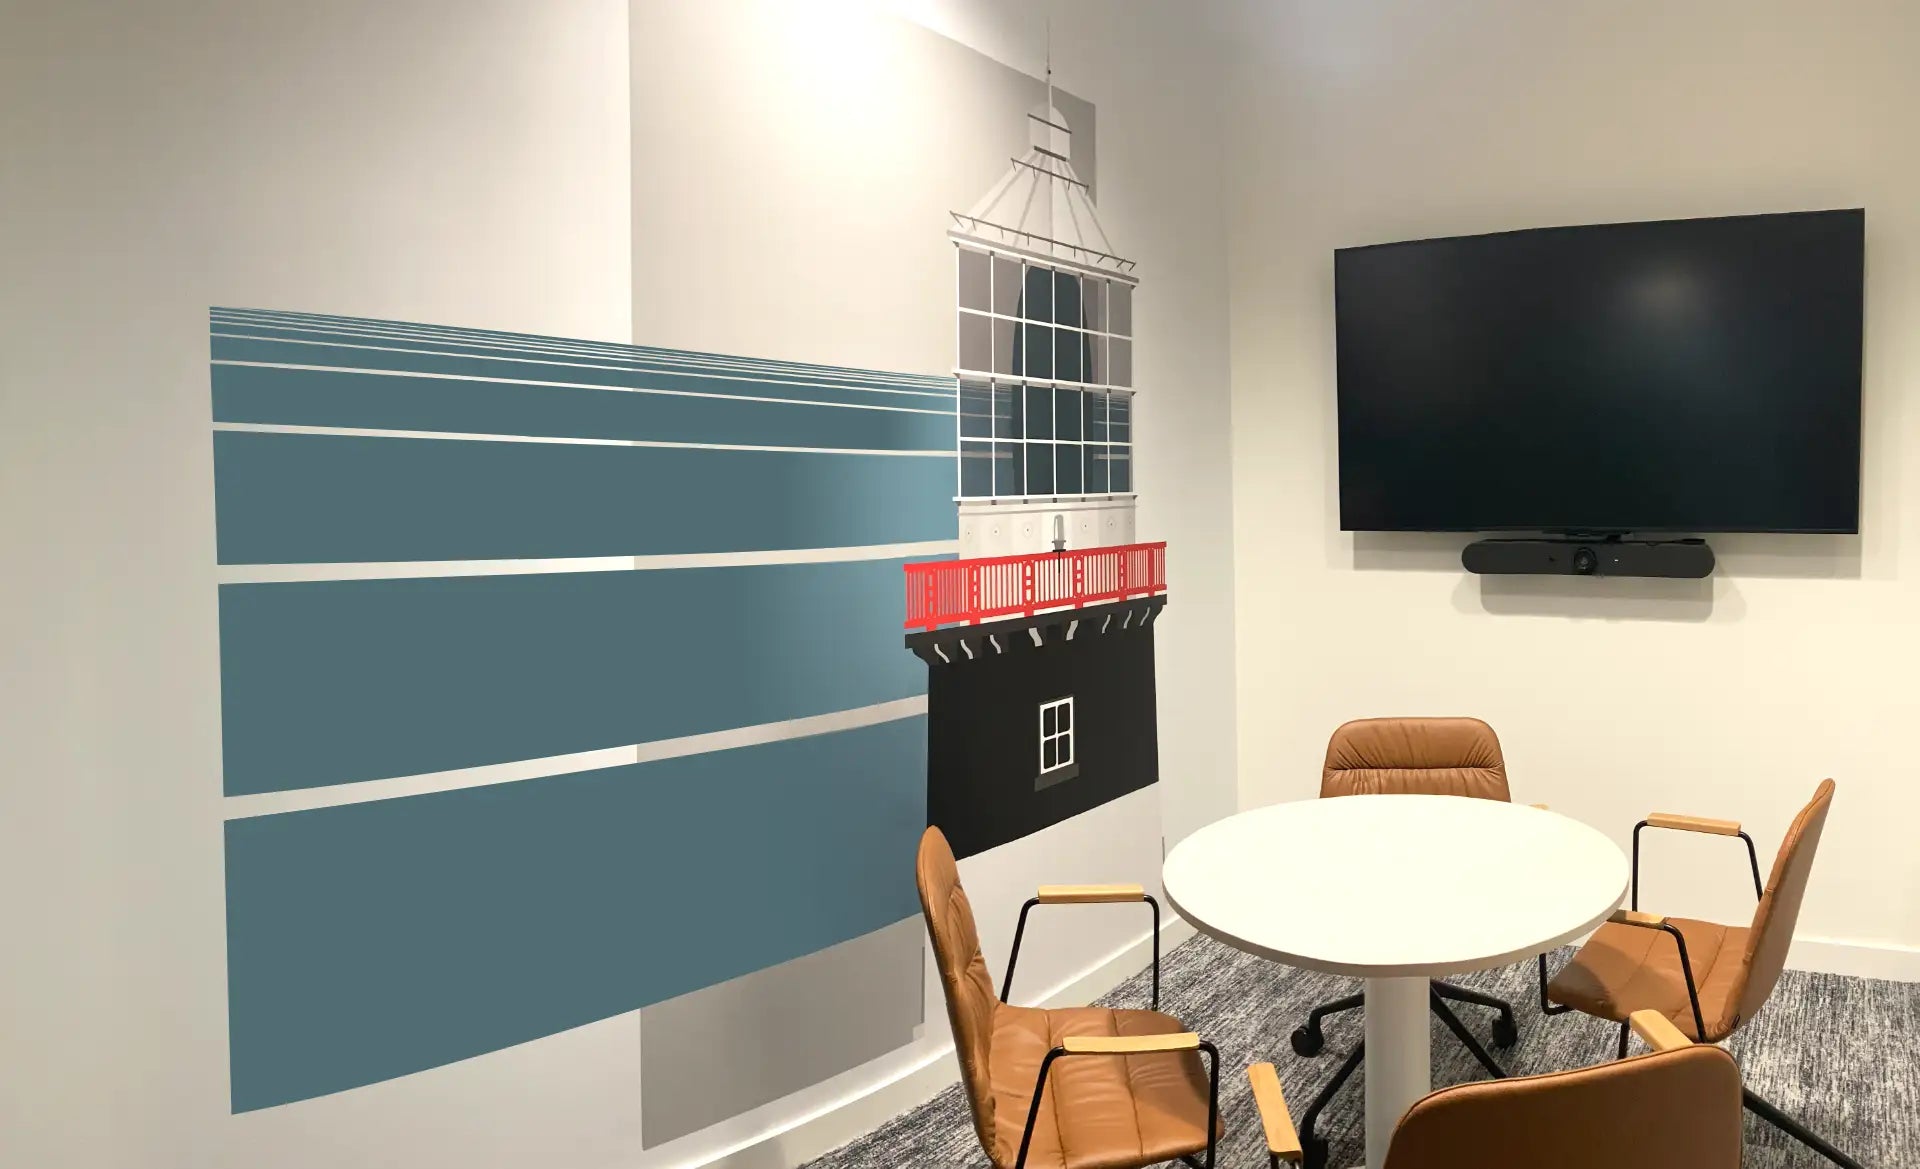 Conference room at CH Robinson Cork with custom wall graphic depicting the Old Head of Kinsale lighthouse